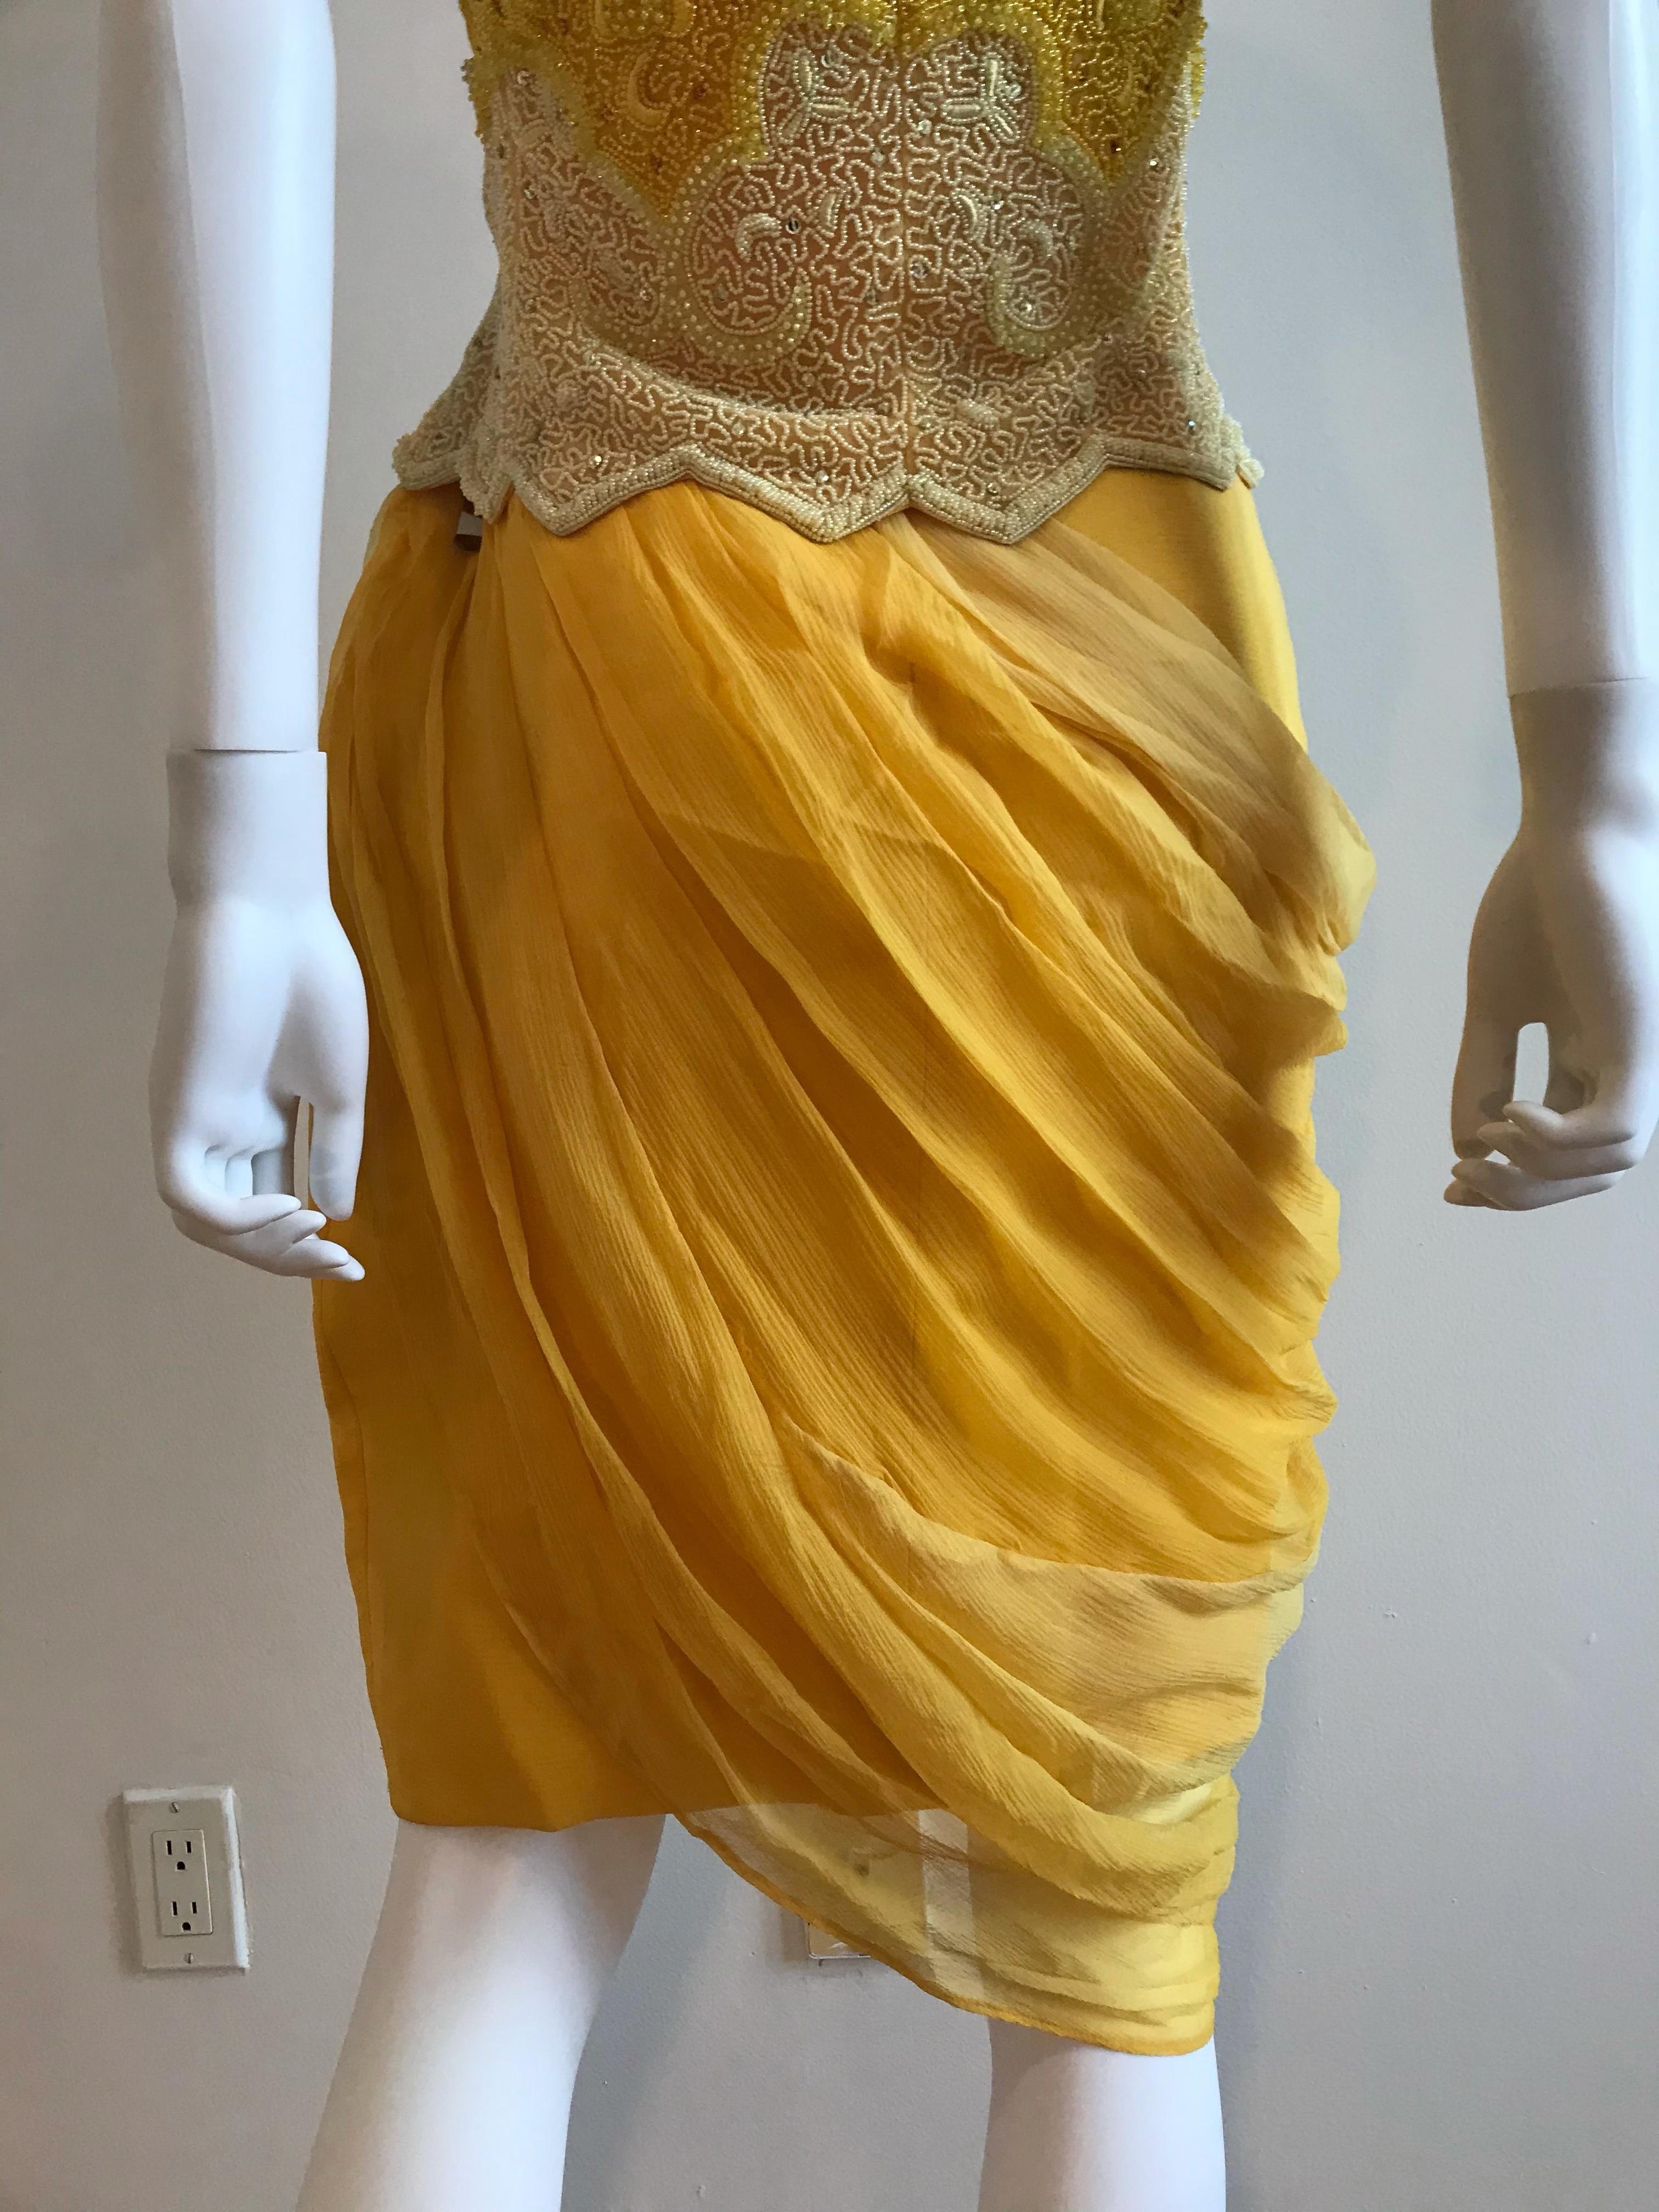 Gianni Versace for Genny Yellow Beaded Jacket and Chiffon Skirt Ensemble For Sale 8